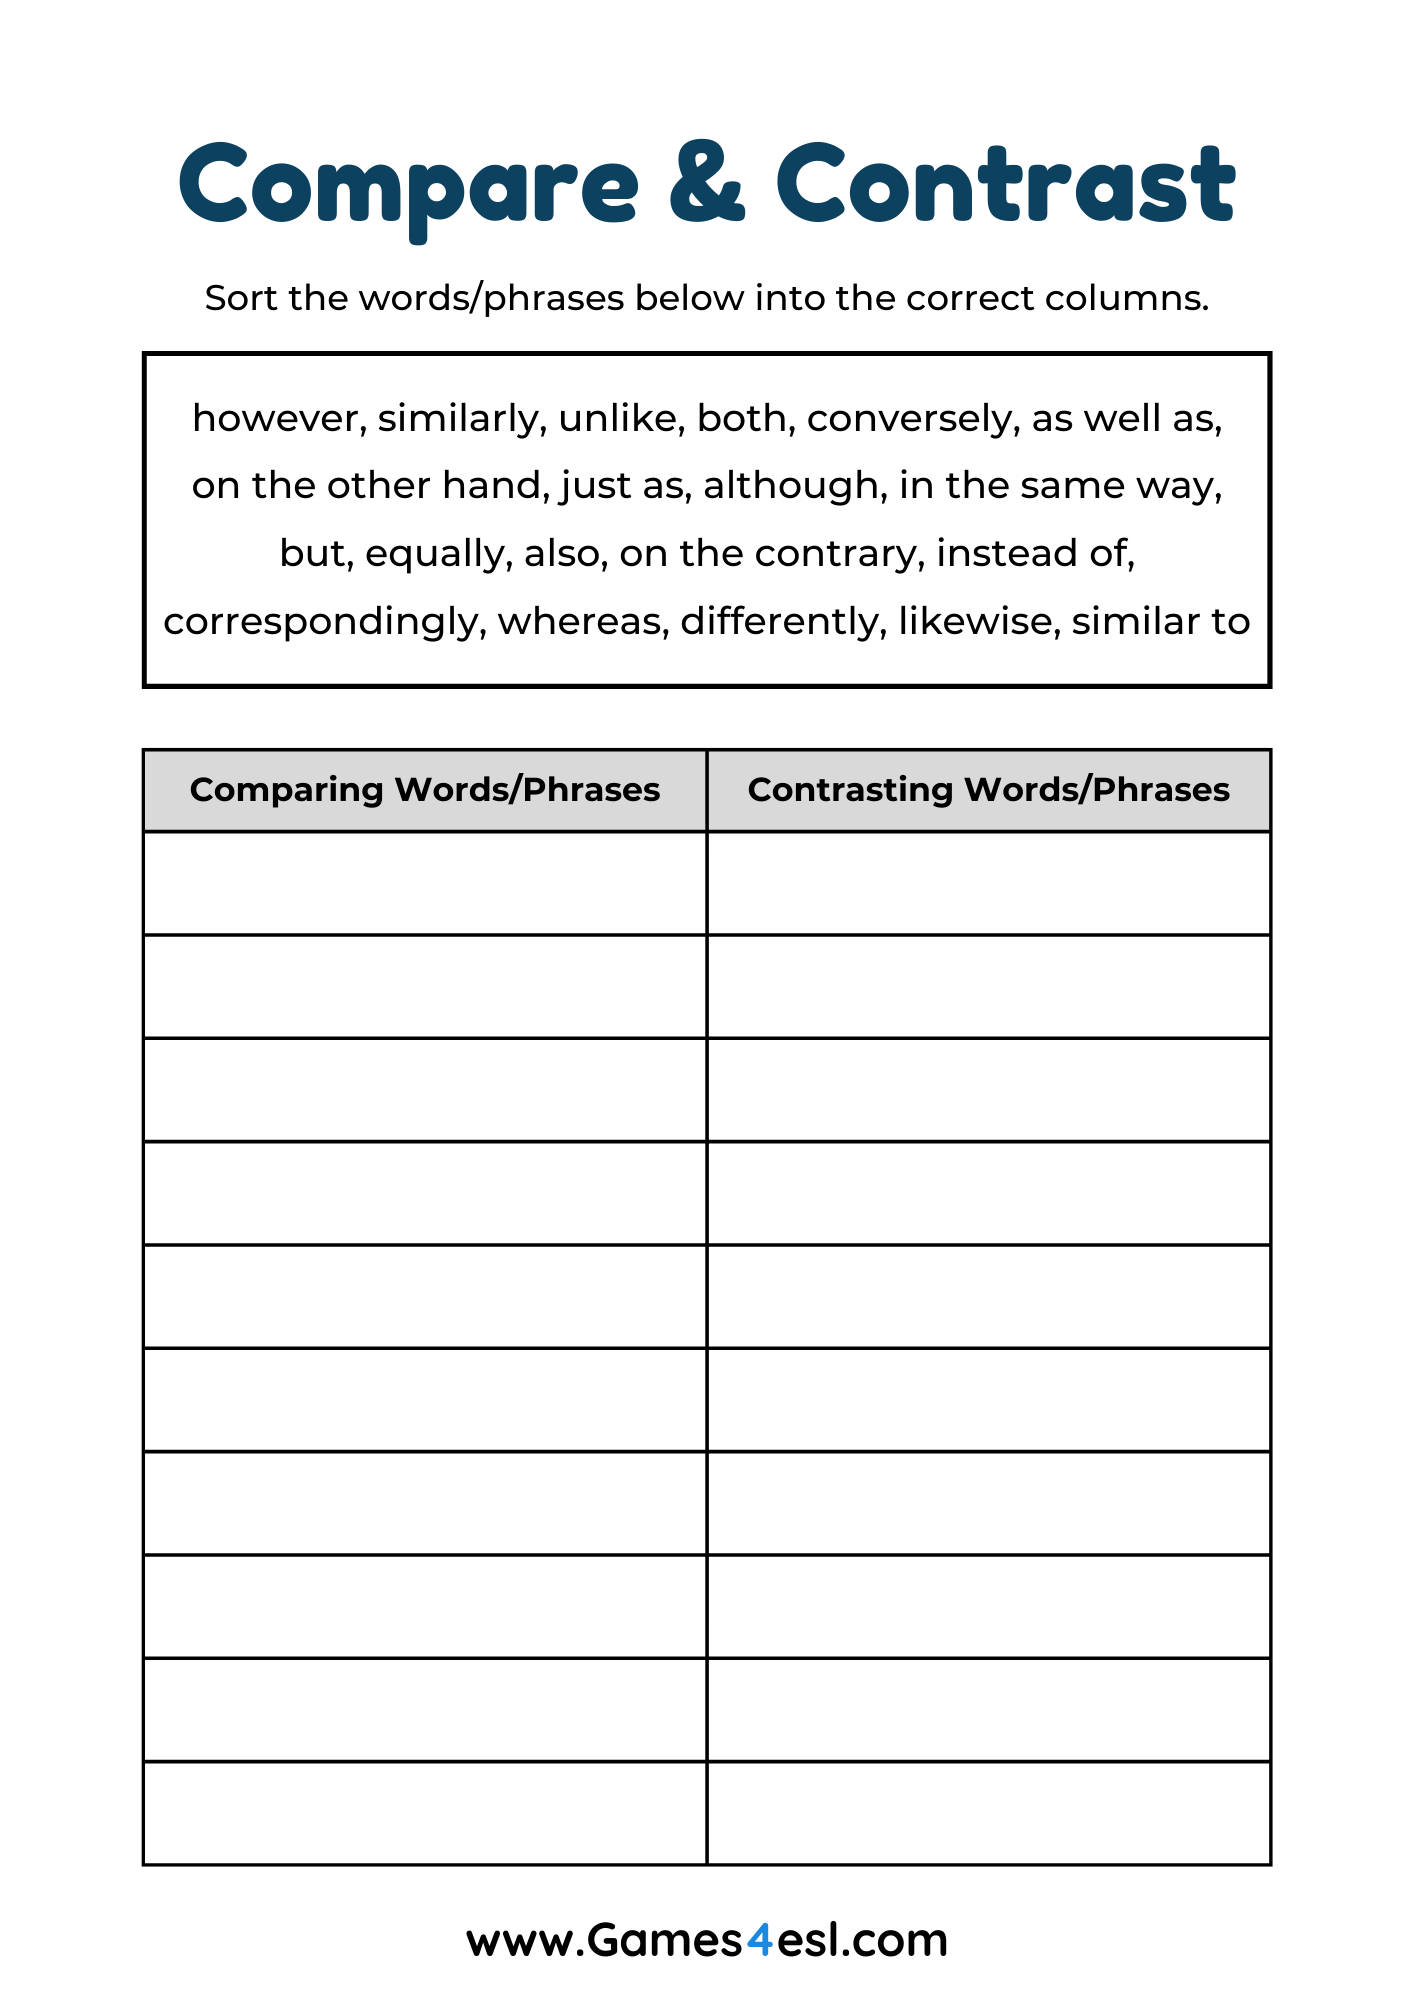 A compare and contrast worksheet to learn words and phrases used to compare and contrast things.